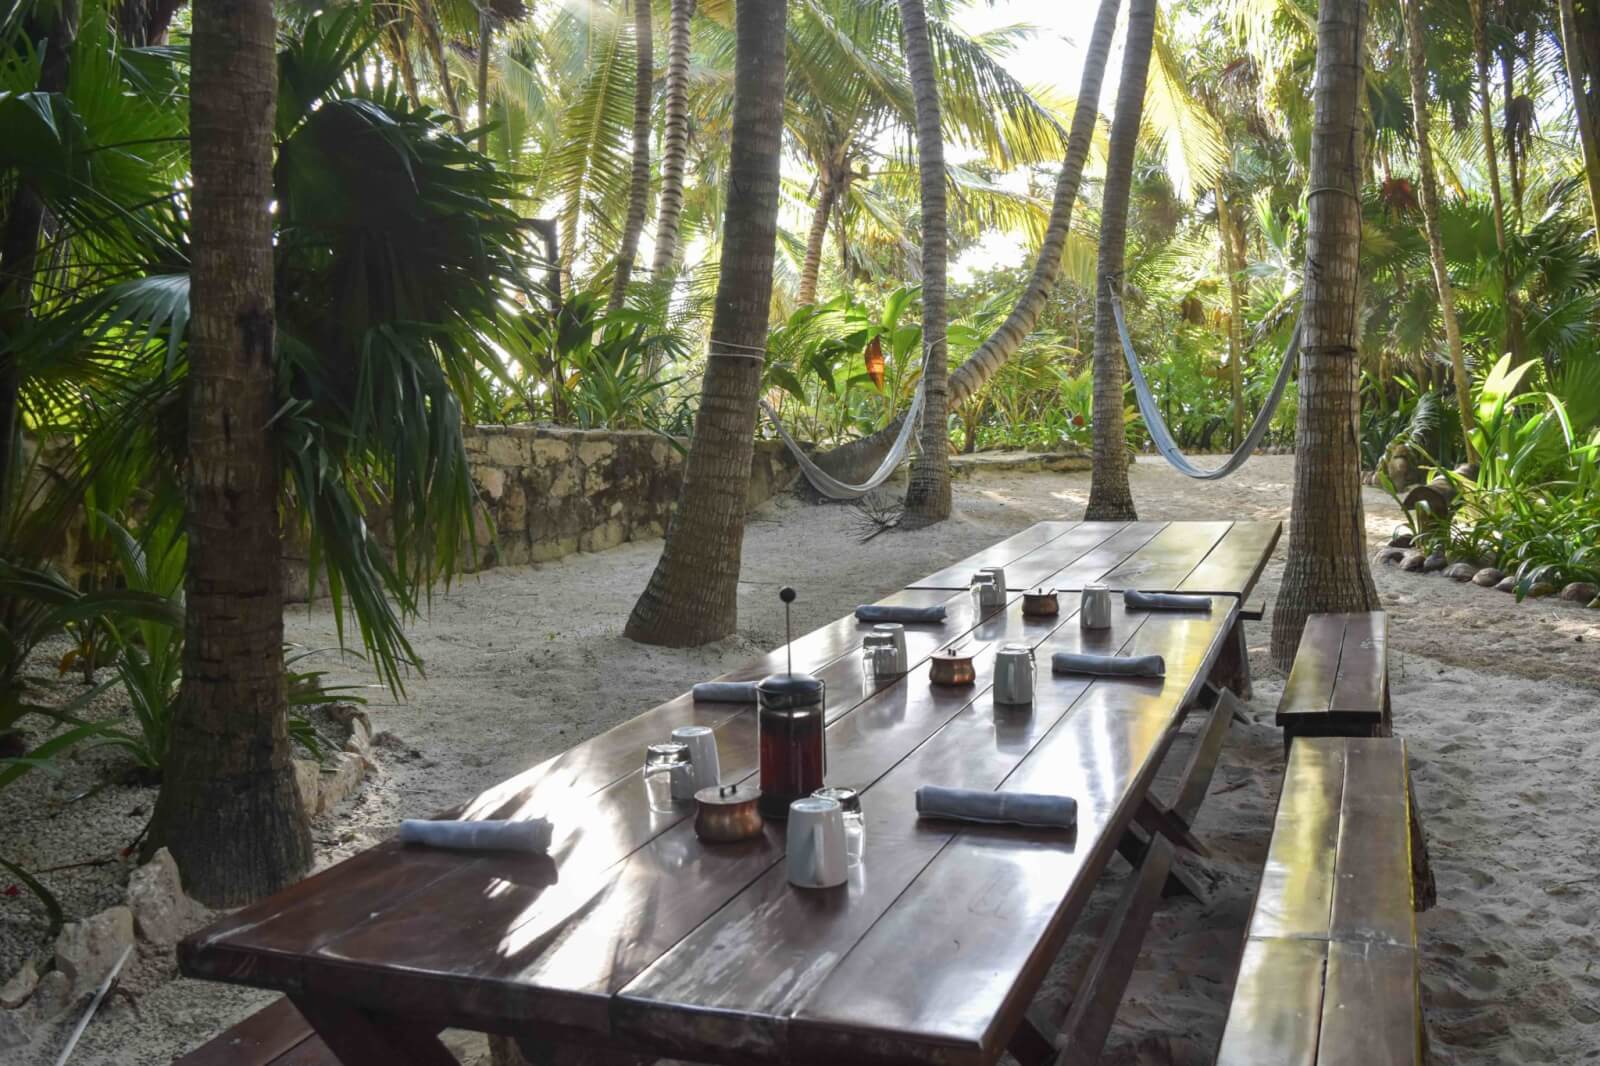 A long wooden table outside at an Tulum eco resort